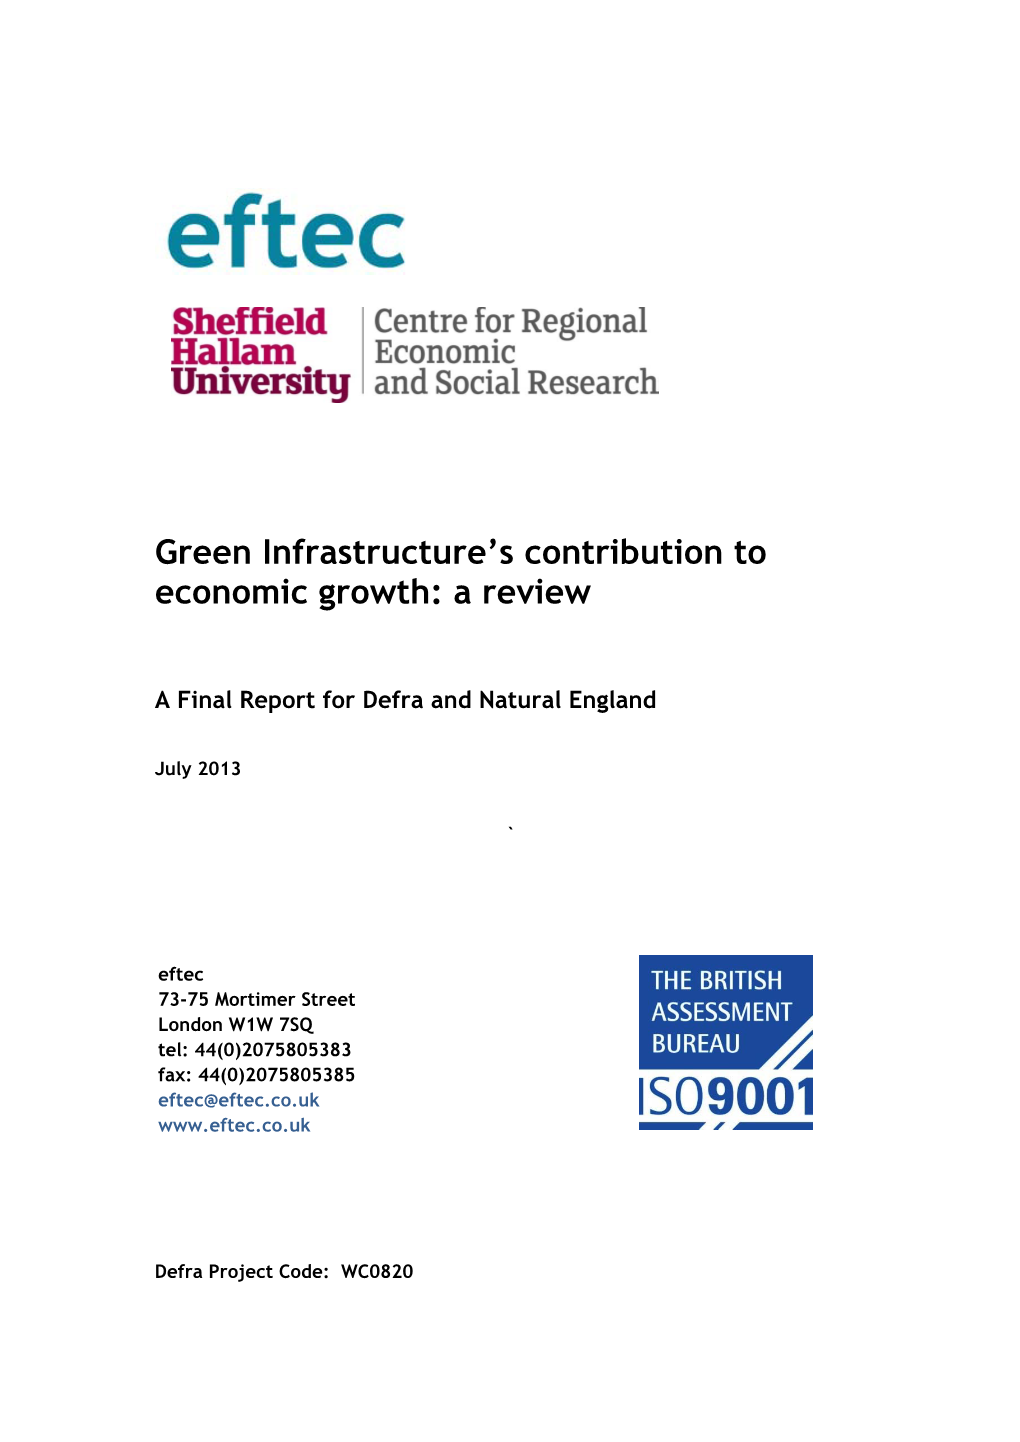 Green Infrastructure's Contribution to Economic Growth: a Review